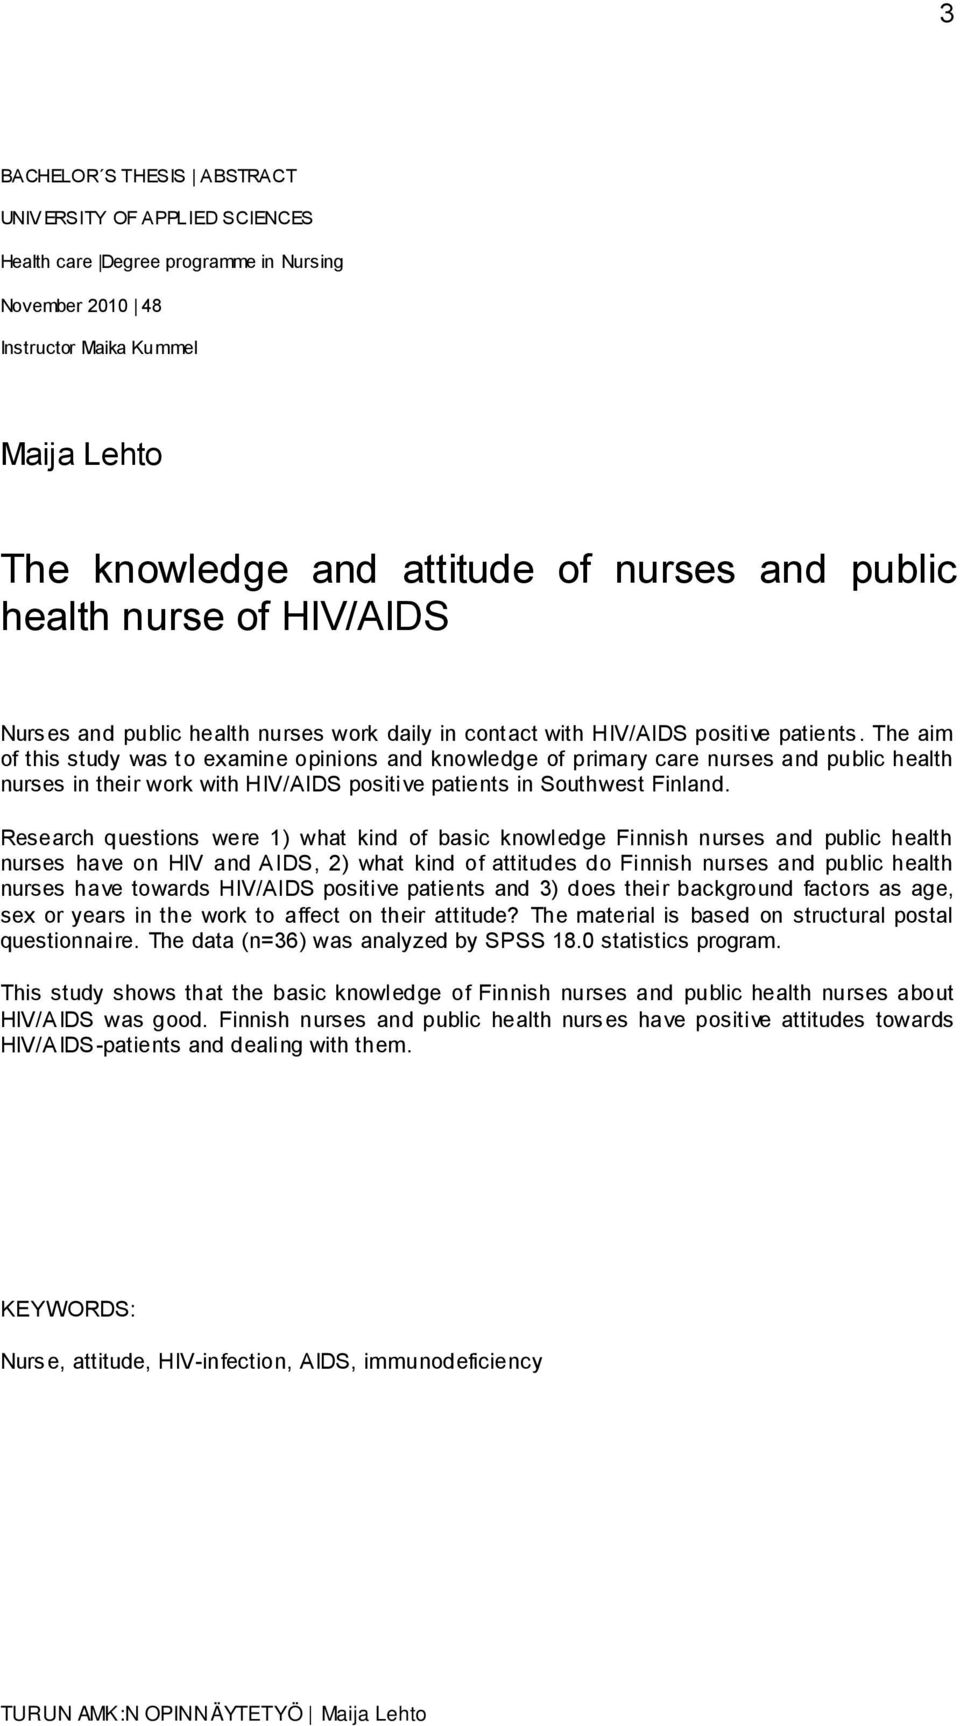 The aim of this study was to examine opinions and knowledge of primary care nurses and public health nurses in their work with HIV/AIDS positive patients in Southwest Finland.